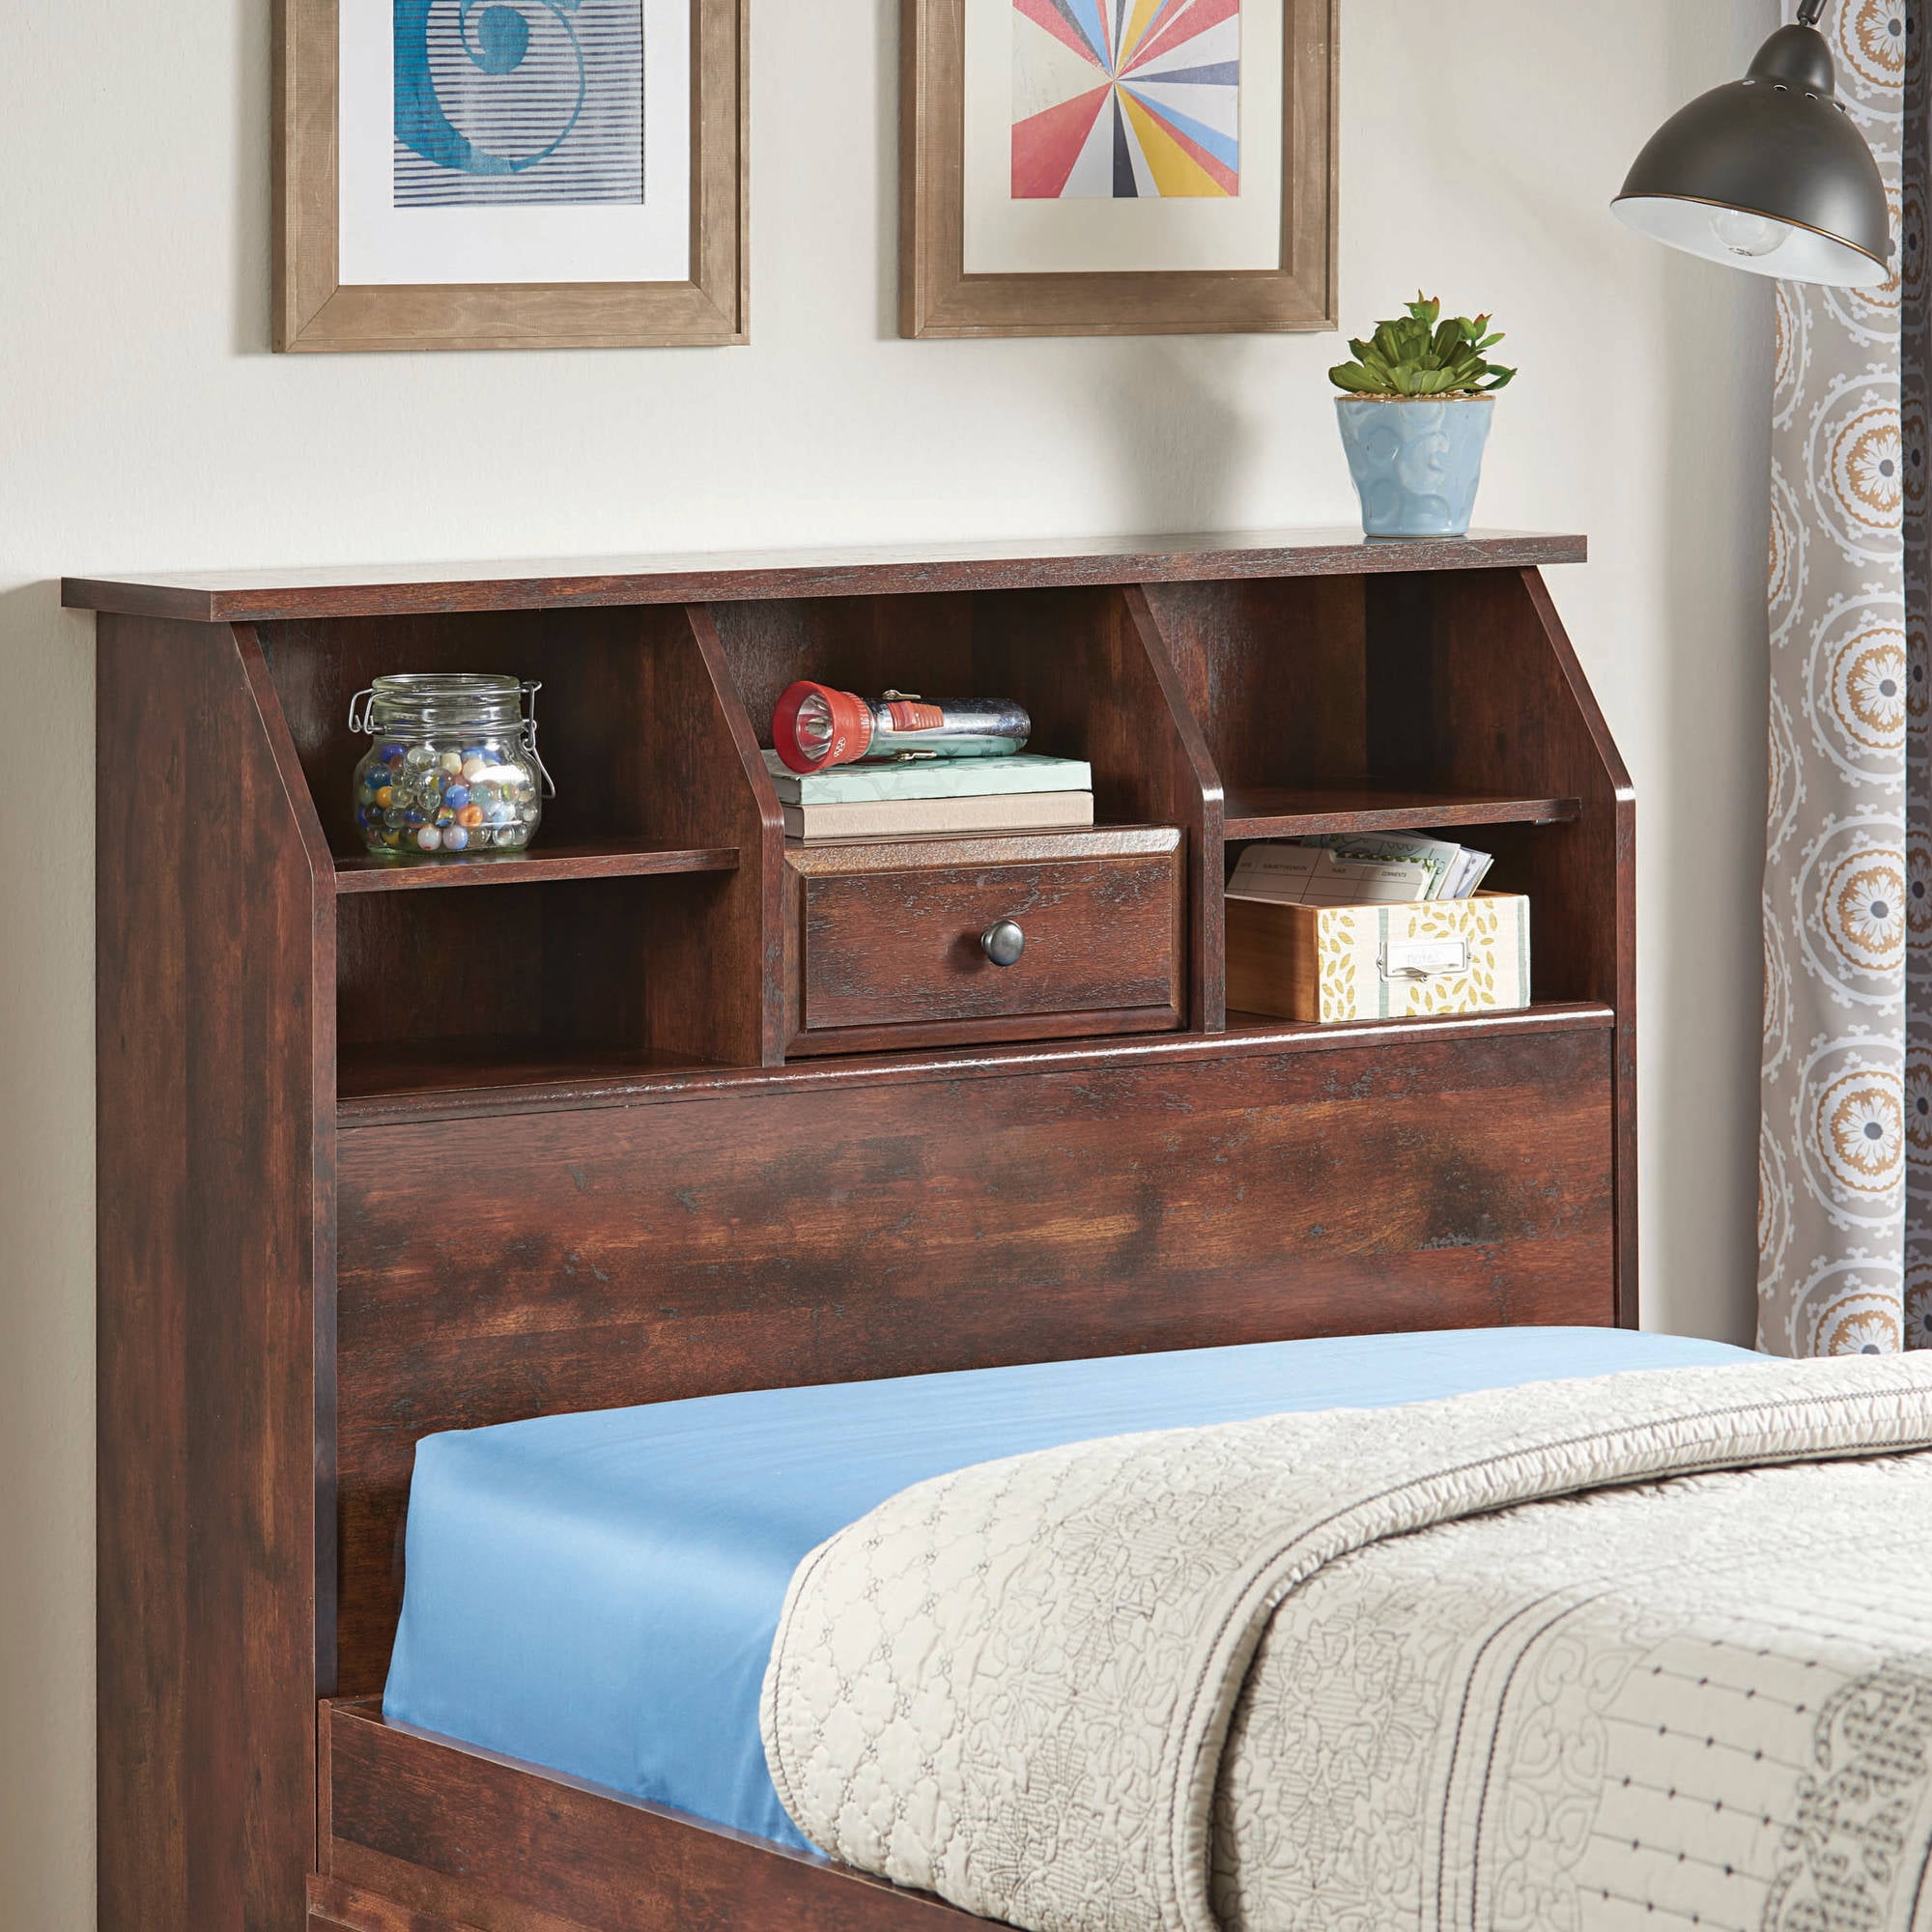 Creatice Twin Bed With Bookcase Headboard 